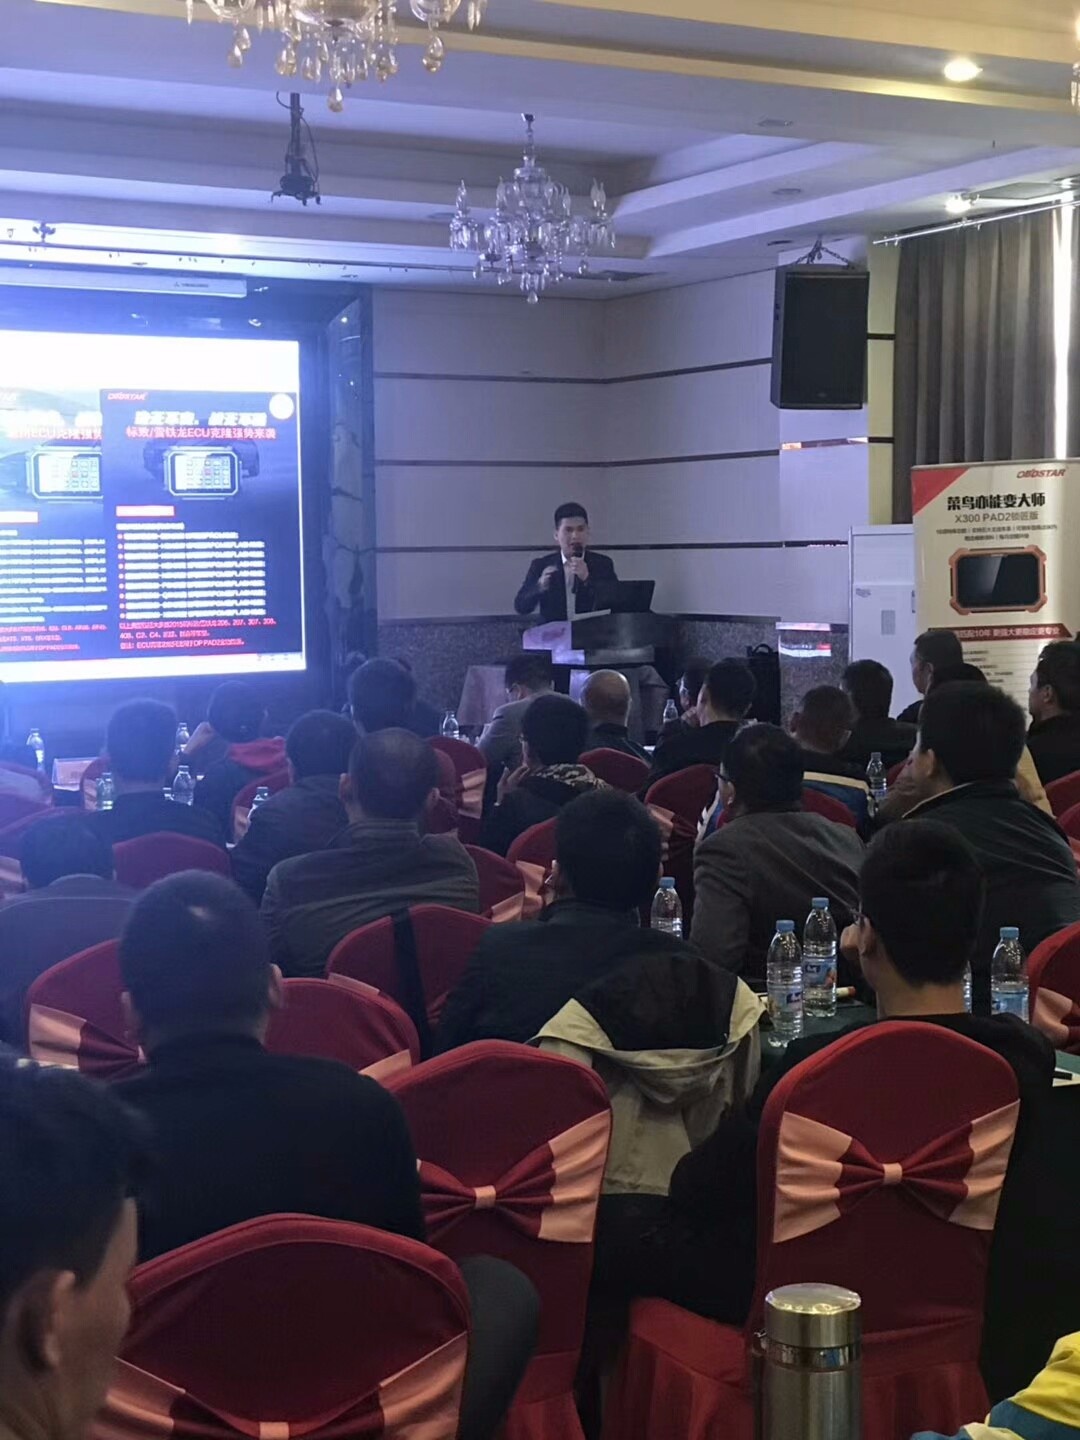 OBDSTAR at Auto Repair Technology Training Conference 2018 in Urumqi